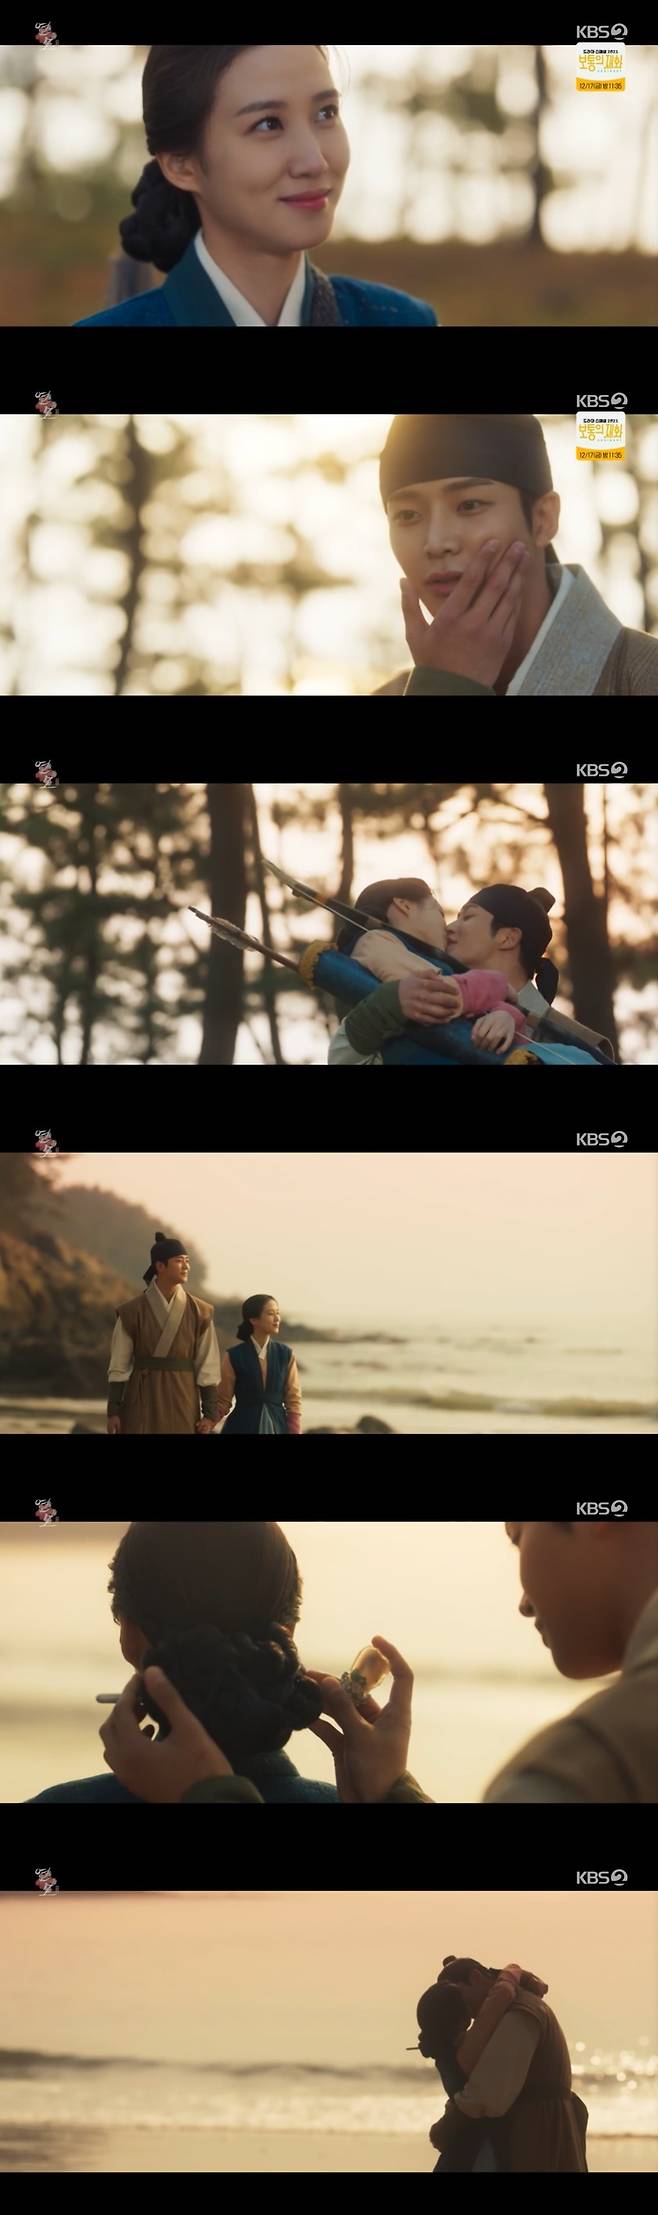 Seoul = = The Kings Affaction ended with Happy Endings.In the last episode of KBS 2TV Mon-Tue drama The Kings Affaction broadcast on the afternoon of the 14th, Lee Hui (Park Eun-bin) and Jung Woon (RO WOON) left the palace and made a new Departure.Lee Hyun (Nam Yoon-soo) was crowned, and Han Ki-jae (Yoon Je-moon), who caused the rebellion, died.On the same day, due to Han Ki-jaes disdain, he closed his eyes to Jeong Seok-jo (Bae Soo-bin) in the Hyundai-gun (Cha Seong-je), who declared that he would persuade his grandfather himself, saying that he would inform his grandfather of the fact of his position.I dried it around, but I did not avoid it and said, I can not die because of me, I can not see my people die anymore.Lee said, I want to have a fine woman, and when I get out of this job, I want to buy it. I want to live, I will live.Then he stroked the face of Jung Woon and said, The Kings Effection.I have never been in the Kings Affaction for a single moment from the beginning. They embraced each other.Lee suggested, I will do my best to prevent Han Ki-jae. I will do everything my grandfather wants, so please stop the sacrifice.Lee, who tried to persuade him, tried to make a decision with Han Ki-jae, saying, I told Kim Sang-gung that I poisoned my car.Han Ki-jae closed his eyes and Jung Ji-woon appeared in front of Lee Hwi, who was vomiting blood.Thank you for being my wife, I will make you happy, Jung said, but I had an ominous feeling. Is this a dream?Jung Ji-woon, who let go of his hand. He disappeared, and only Lee was left alone.It was all a dream. Fortunately, the critical Yi Hui opened his eyes. Jung Ji-woon was standing by. Jung Ji-woon said, Your Grace, can you see me?Thank you so much for living, he said, holding his hand tightly and weeping. Kim Sang-gung announced that Han Ki-jae had passed away.Its all over, everyone, said Jung Ji-un, and now you dont have to worry about anything. They hugged and showed tears of relief.The contrast (Lee Il-hwa) called Yi Hui and ordered him to go to a place where no one knew, and live without knowing.However, Yi Hwi refused, saying, I have lived so far, and eventually left it to Lee Hyun. Lee Hyun gave Lee a honorary sentence.I want you to erase the way Lee has lived so far, and Dami, a courtier, will restore his dead identity so that he can live a new life, he said.Yi Hui and Jung Ji-un left the palace and began their new life. They had a happy time in love with Alcondalk.They kissed each other while hunting, and Jung Ji-woon gave her a maiden whom she had so much wanted. They shared a sweet kiss and promised a happy future.Meanwhile, The Kings Action is a secret royal romance drama that takes place when a child who was born as a twin and abandoned only because she was a girl is a tax collector through the death of Orabi Seson.Following The Kings Affaction, Yoo Seung-ho and Hye-ris Flowering Moon Thought will be broadcast on the 20th.